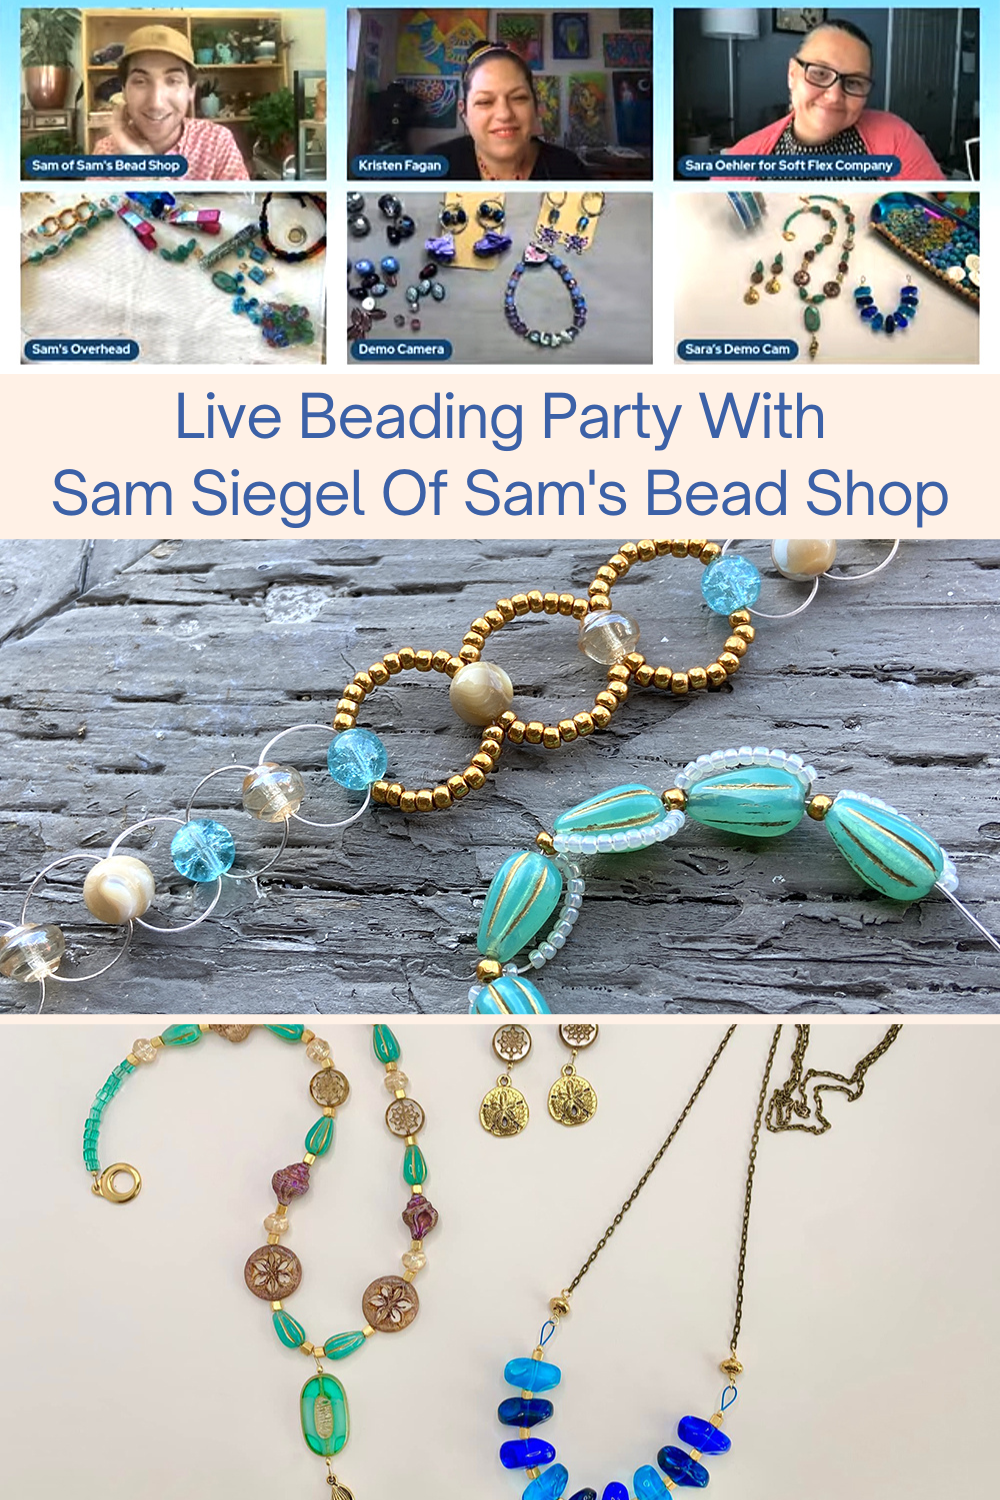 Live Beading Party With Sam Siegel Of Sam's Bead Shop Collage